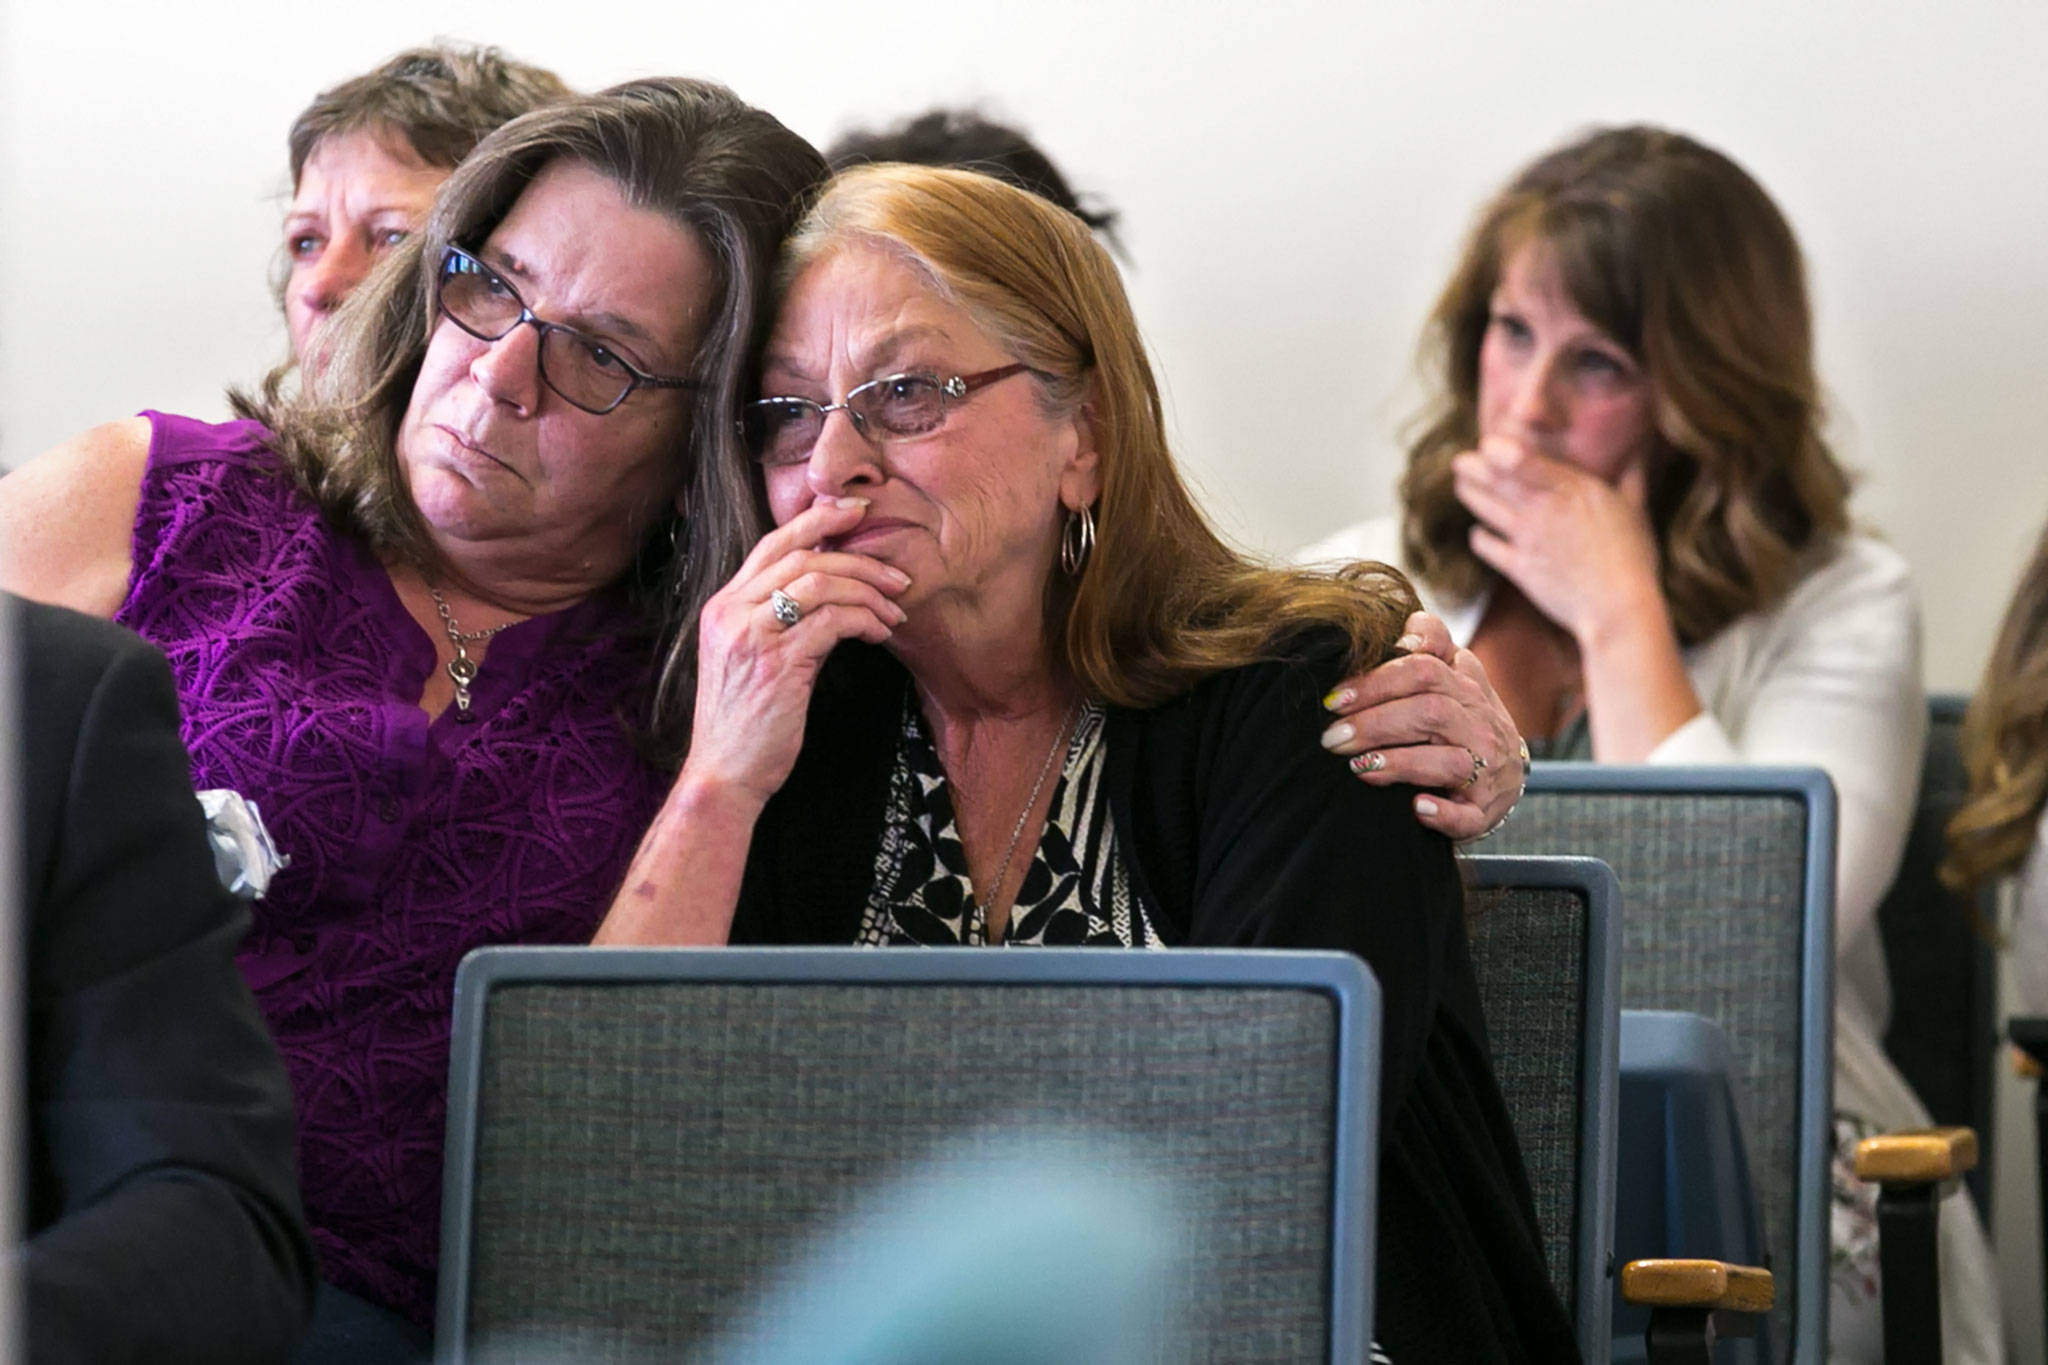 Janine Shaffer (center) is comforted during the sentencing of her attacker, John Kuljis, on Friday at the Snohomish County Courthouse in Everett. (Kevin Clark / The Herald)